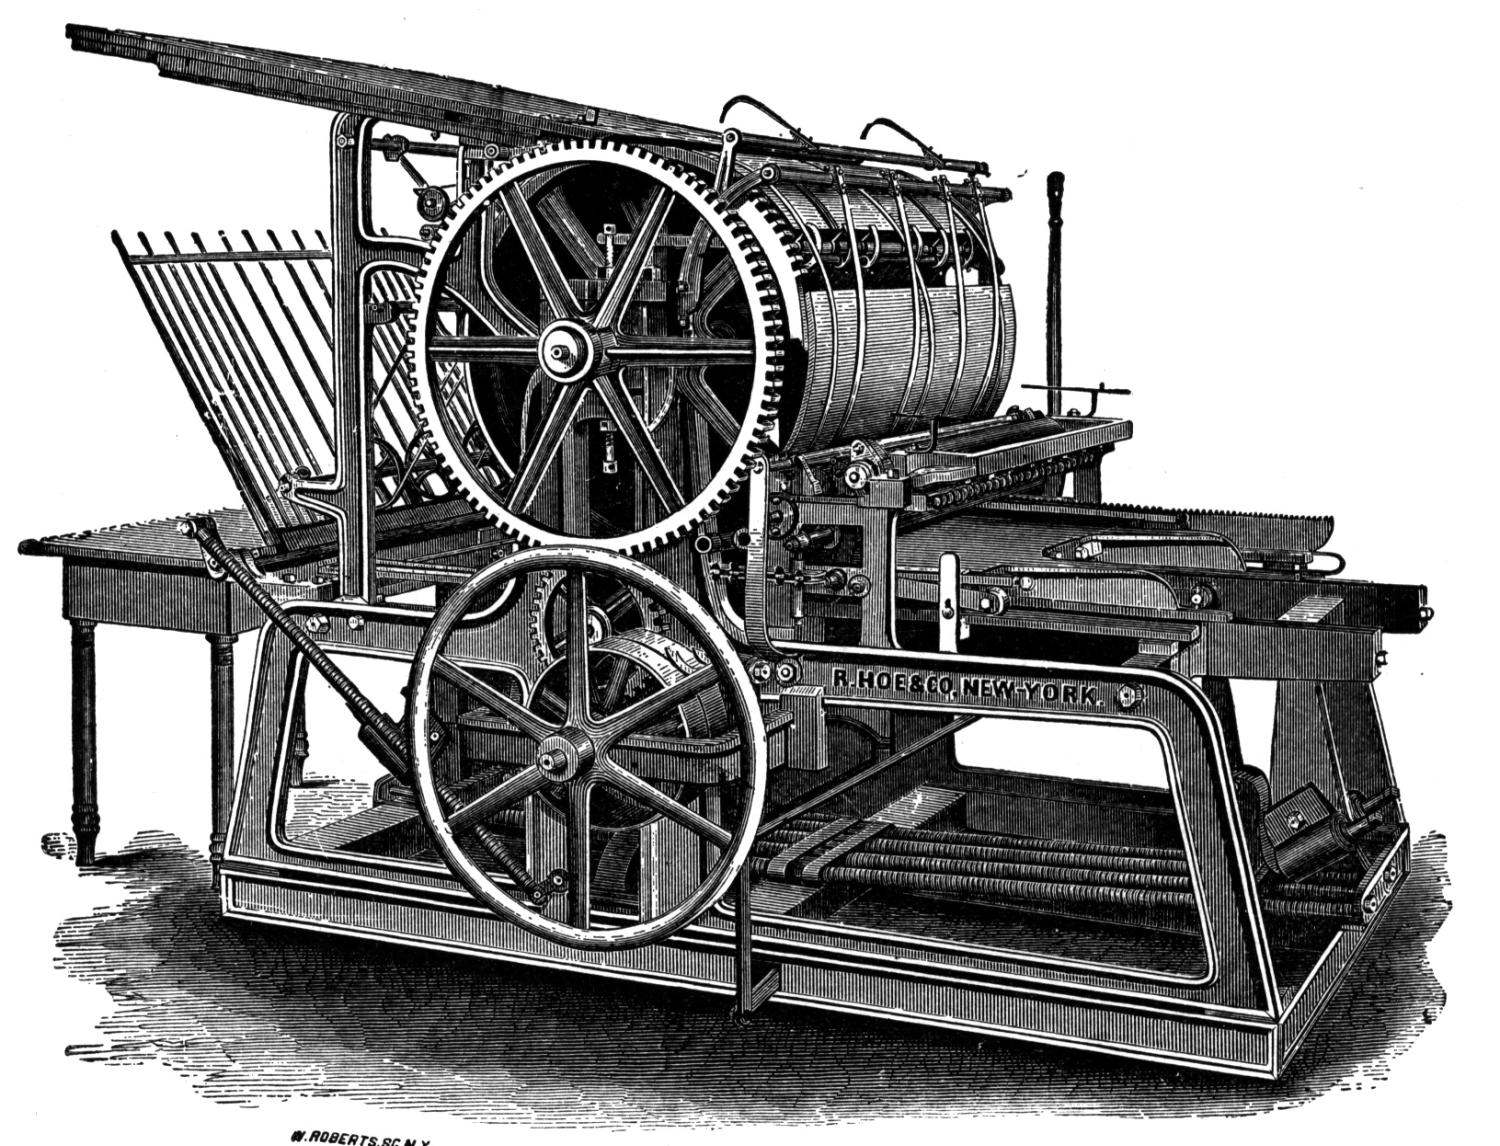 Reasons Why the Printing Press Was a Great Invention - The Classroom